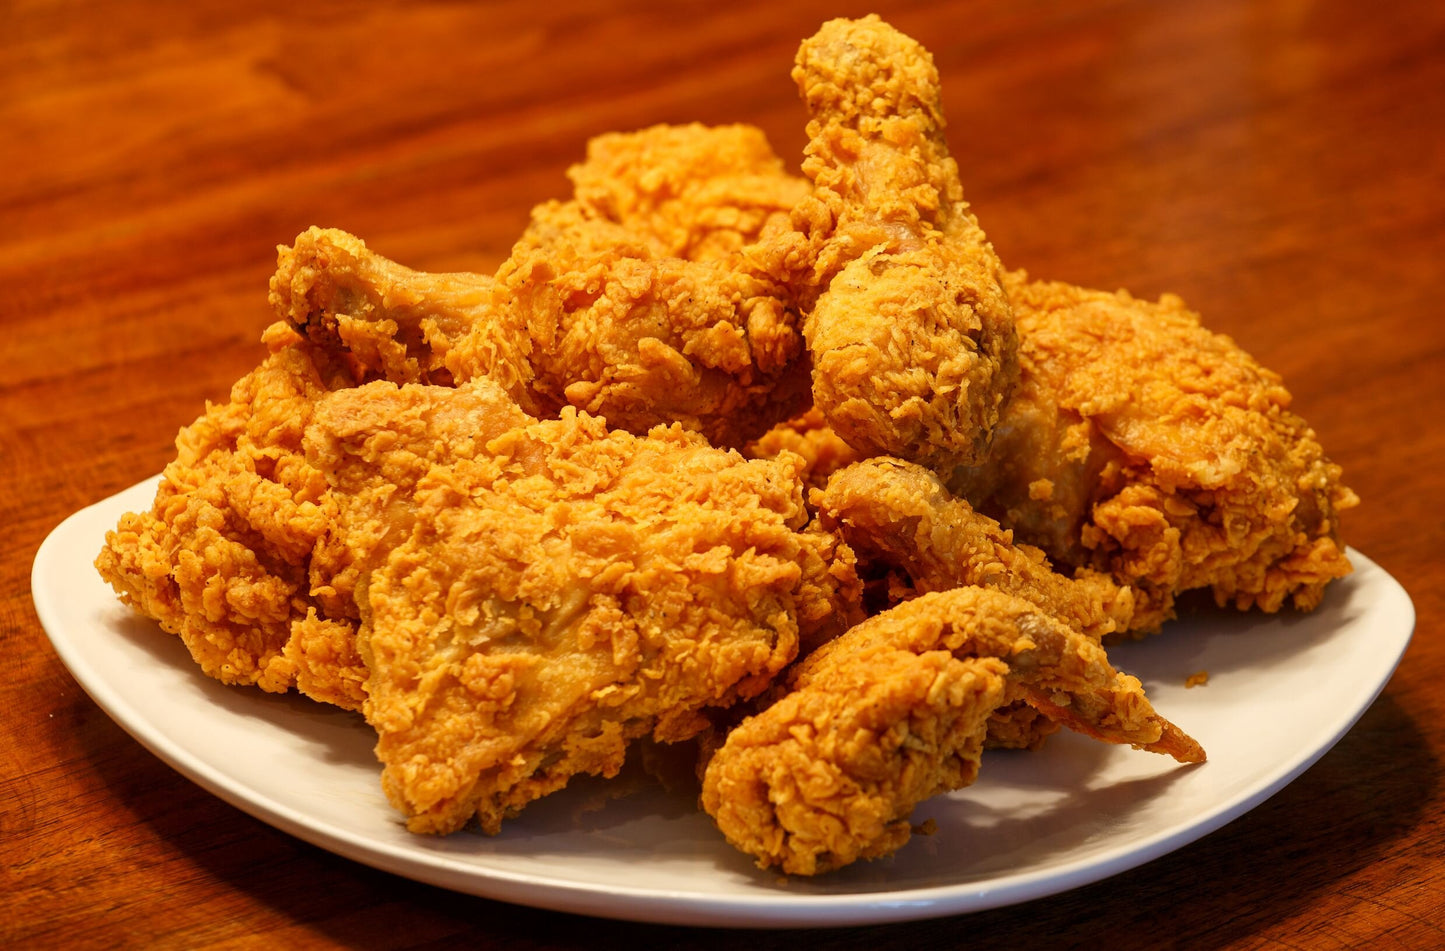 Southern Fried Chicken (Family Meal Deals)